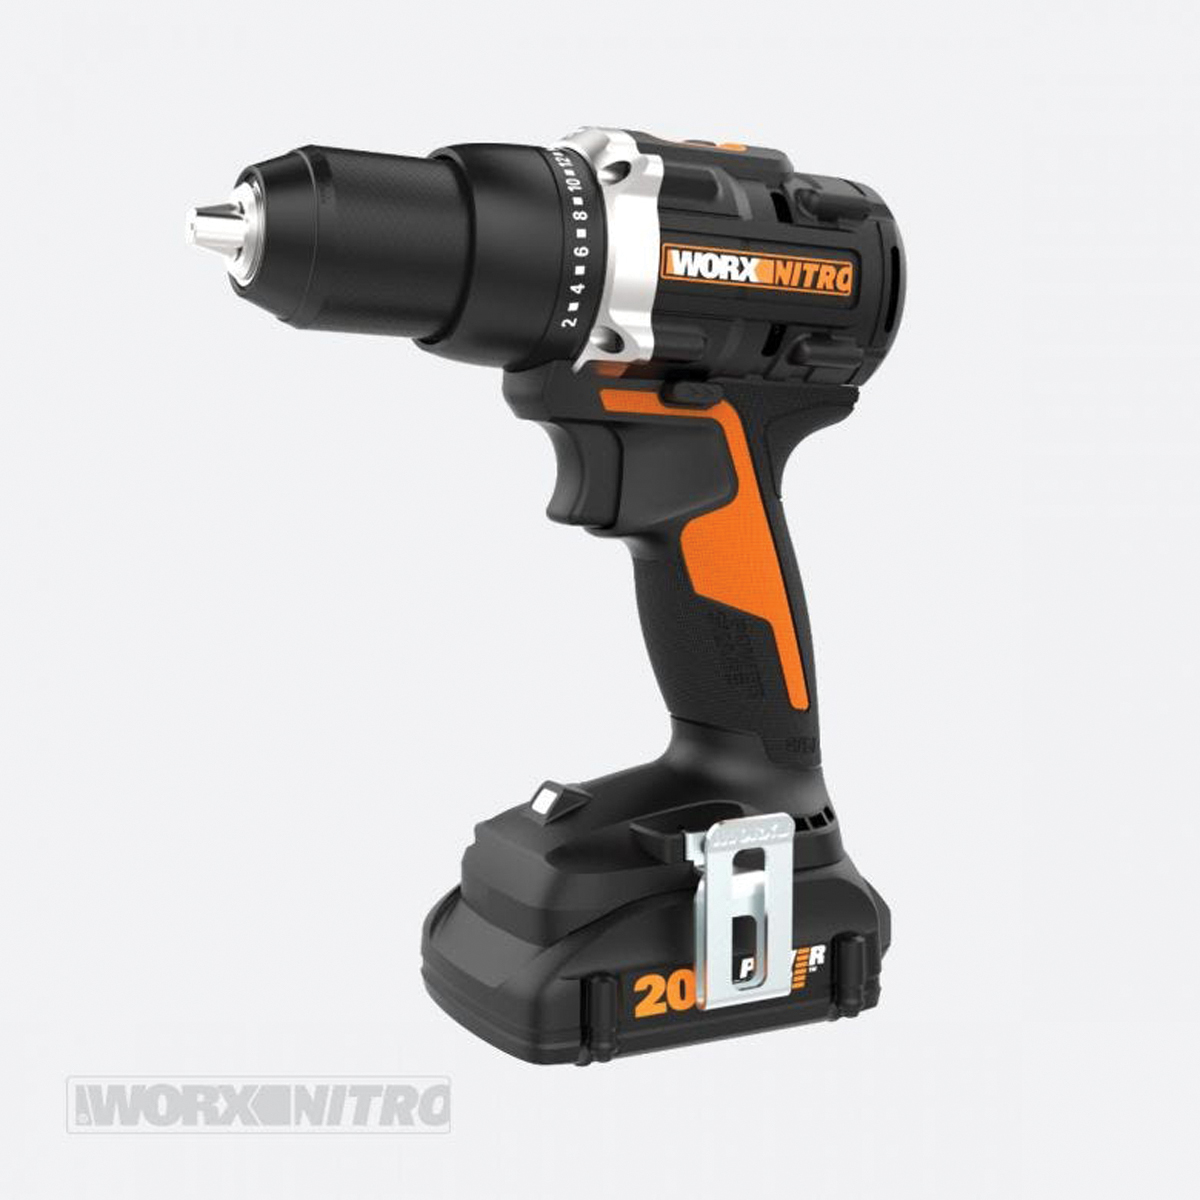 Nitro WX102L Cordless Drill/Driver, Battery Included, 20 V, 2 Ah, 1/2 in Chuck, Ratcheting Chuck